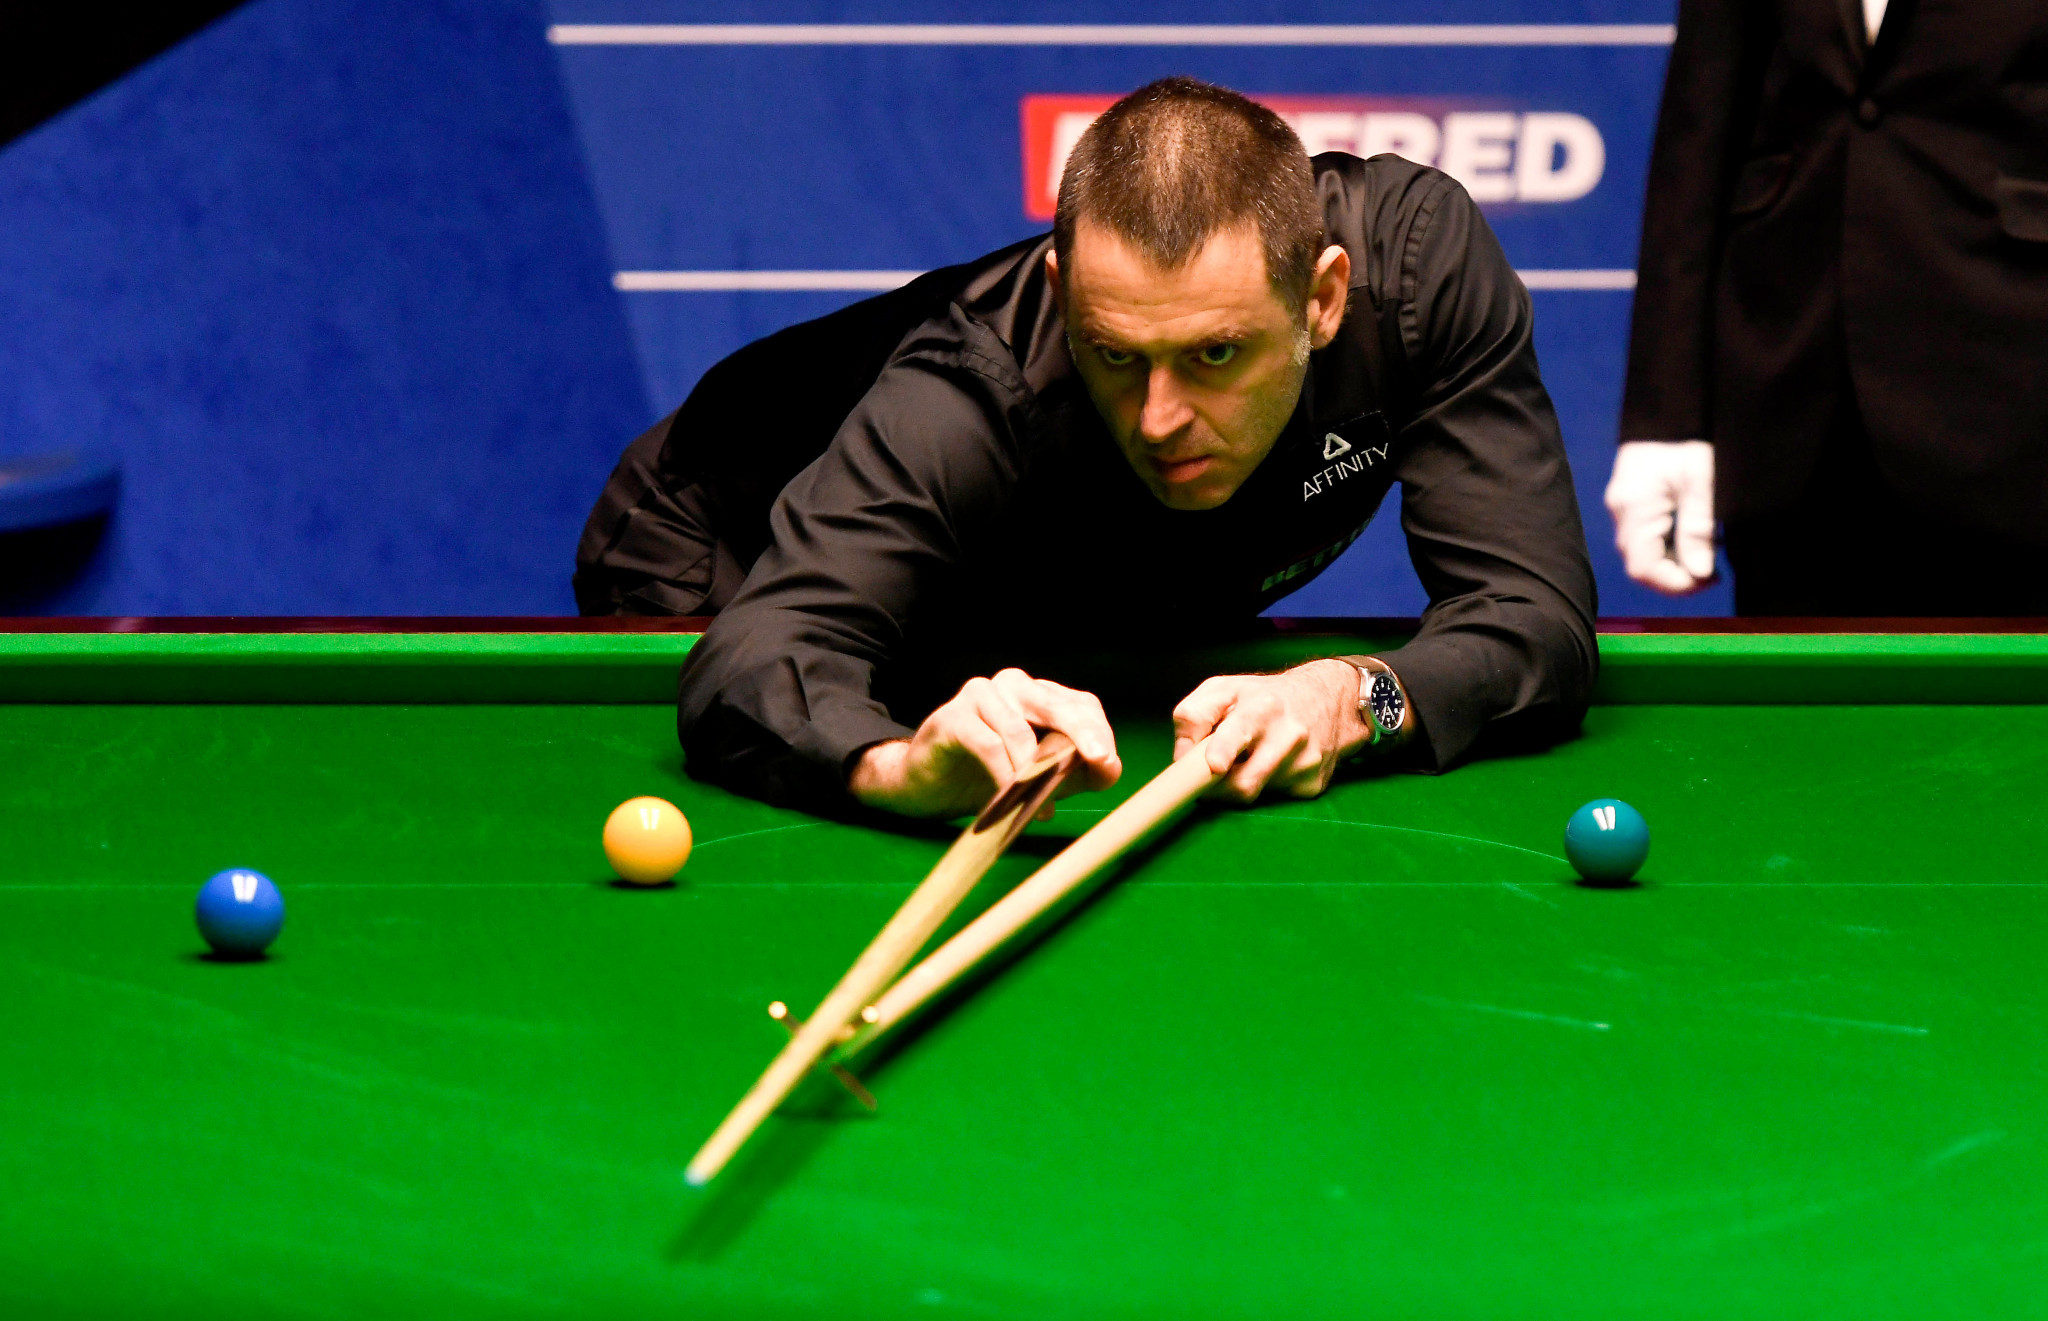 O'Sullivan wins in record time on day four of World Snooker Championship